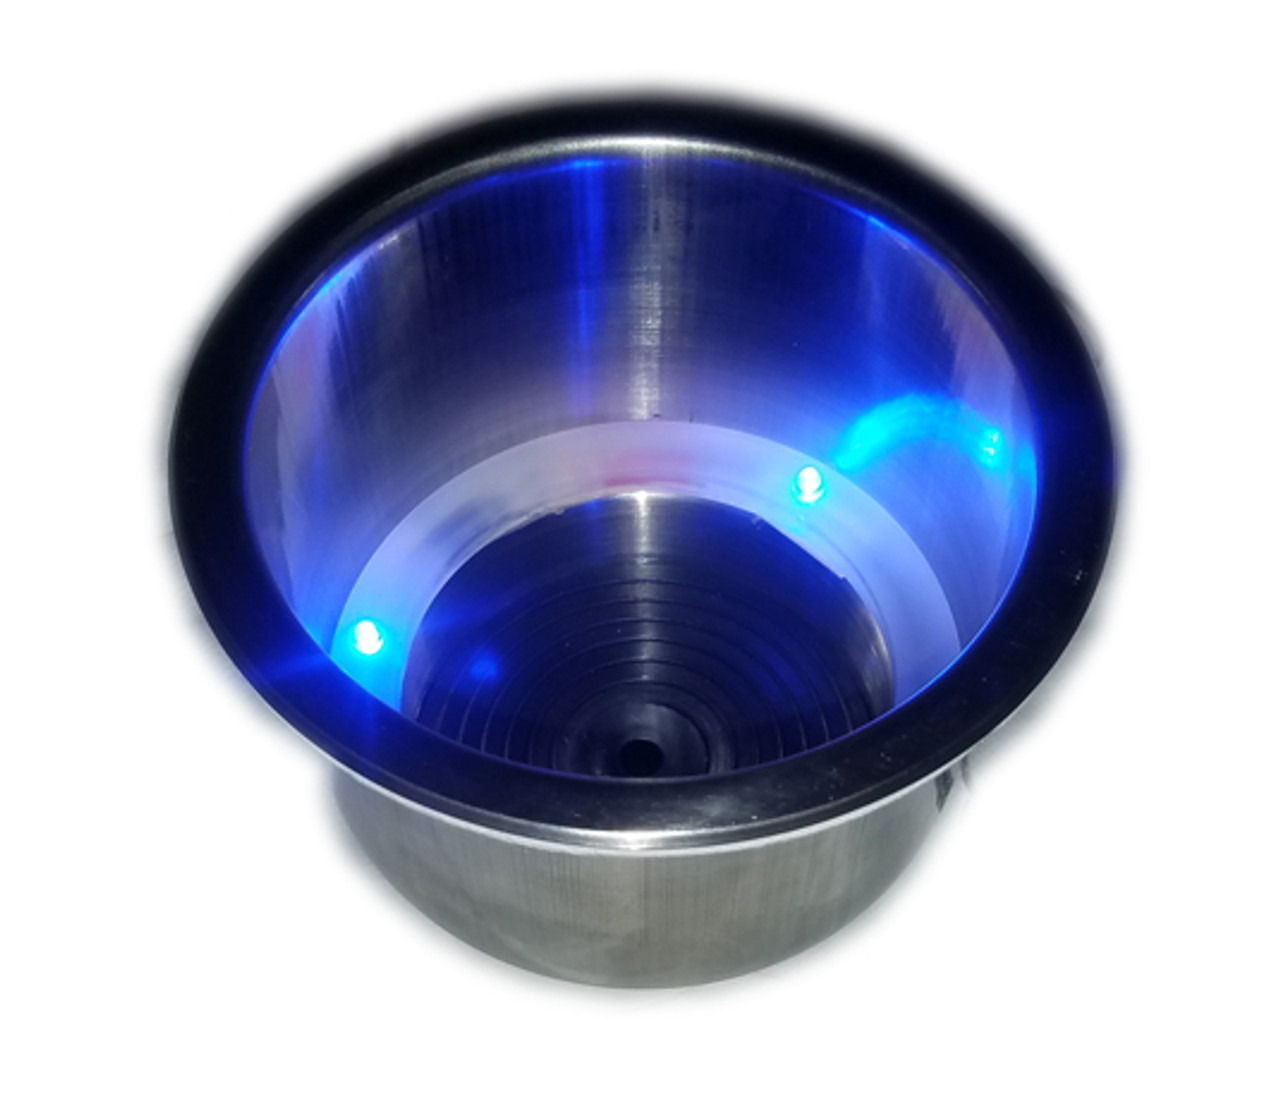 Stainless Steel Drink Holder with Drain and Blue LED Lights